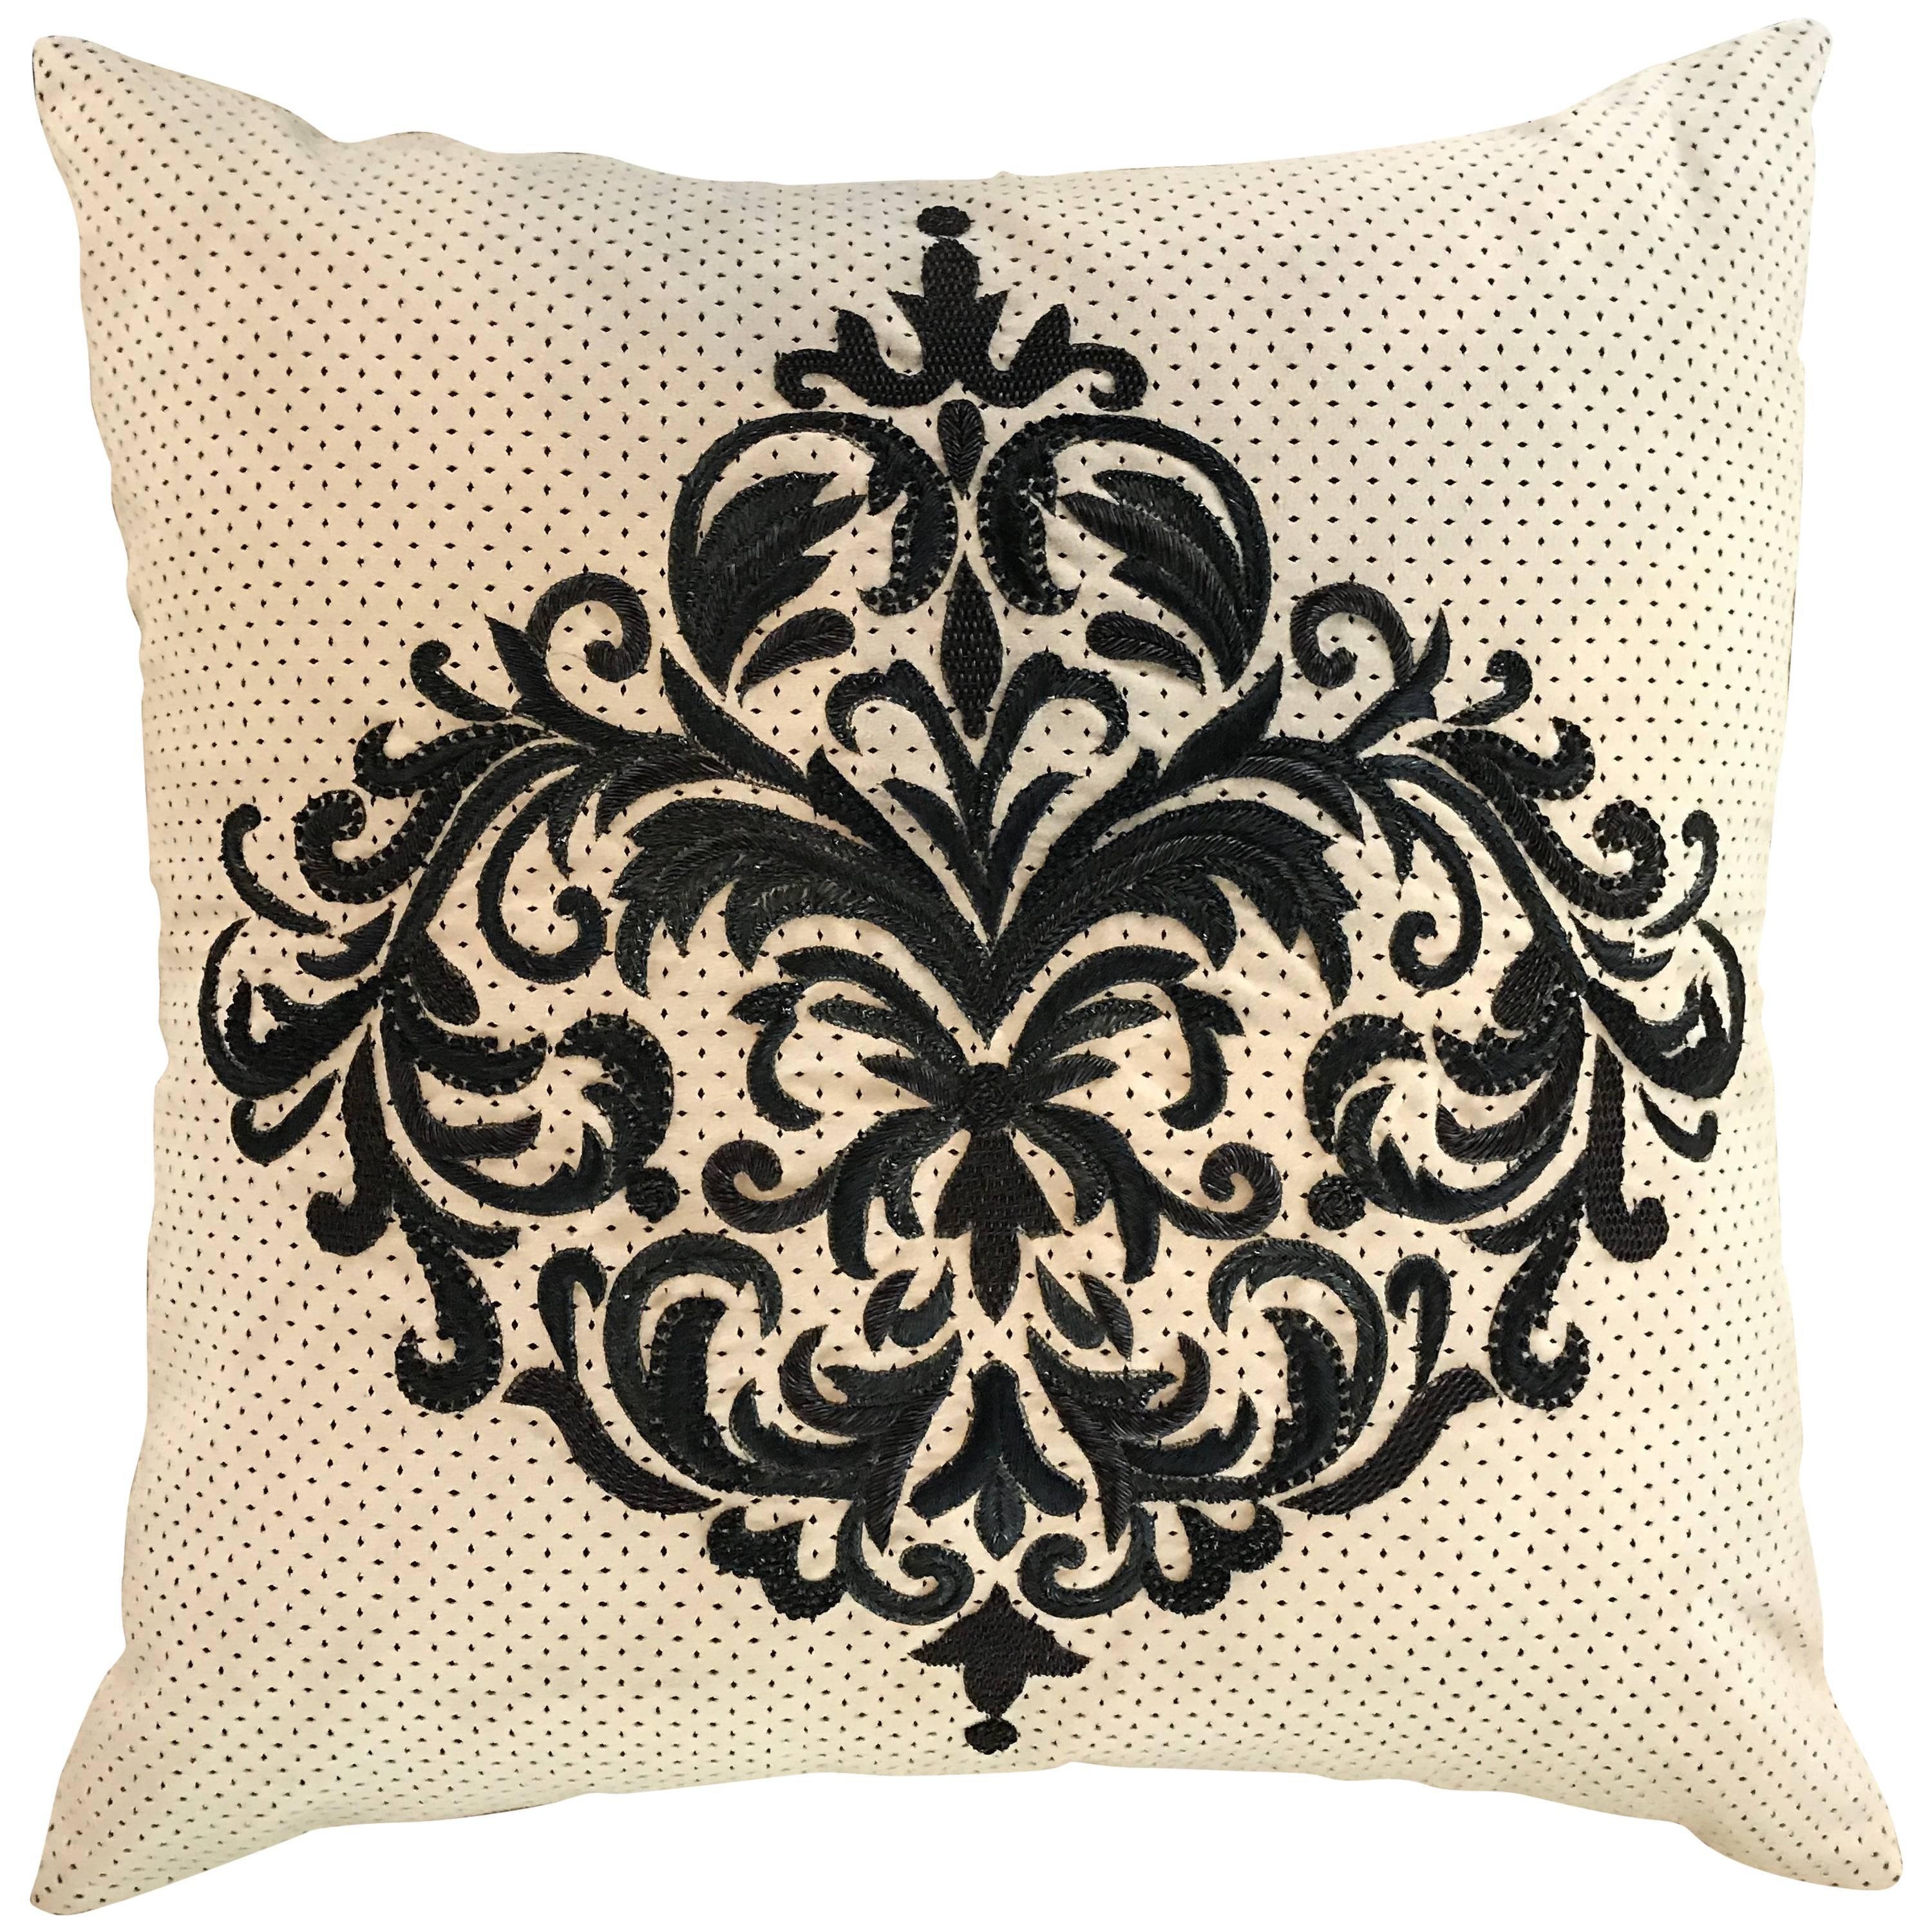 Perforated Ultra Suede Sand and Black Embroidered Decorative Pillow